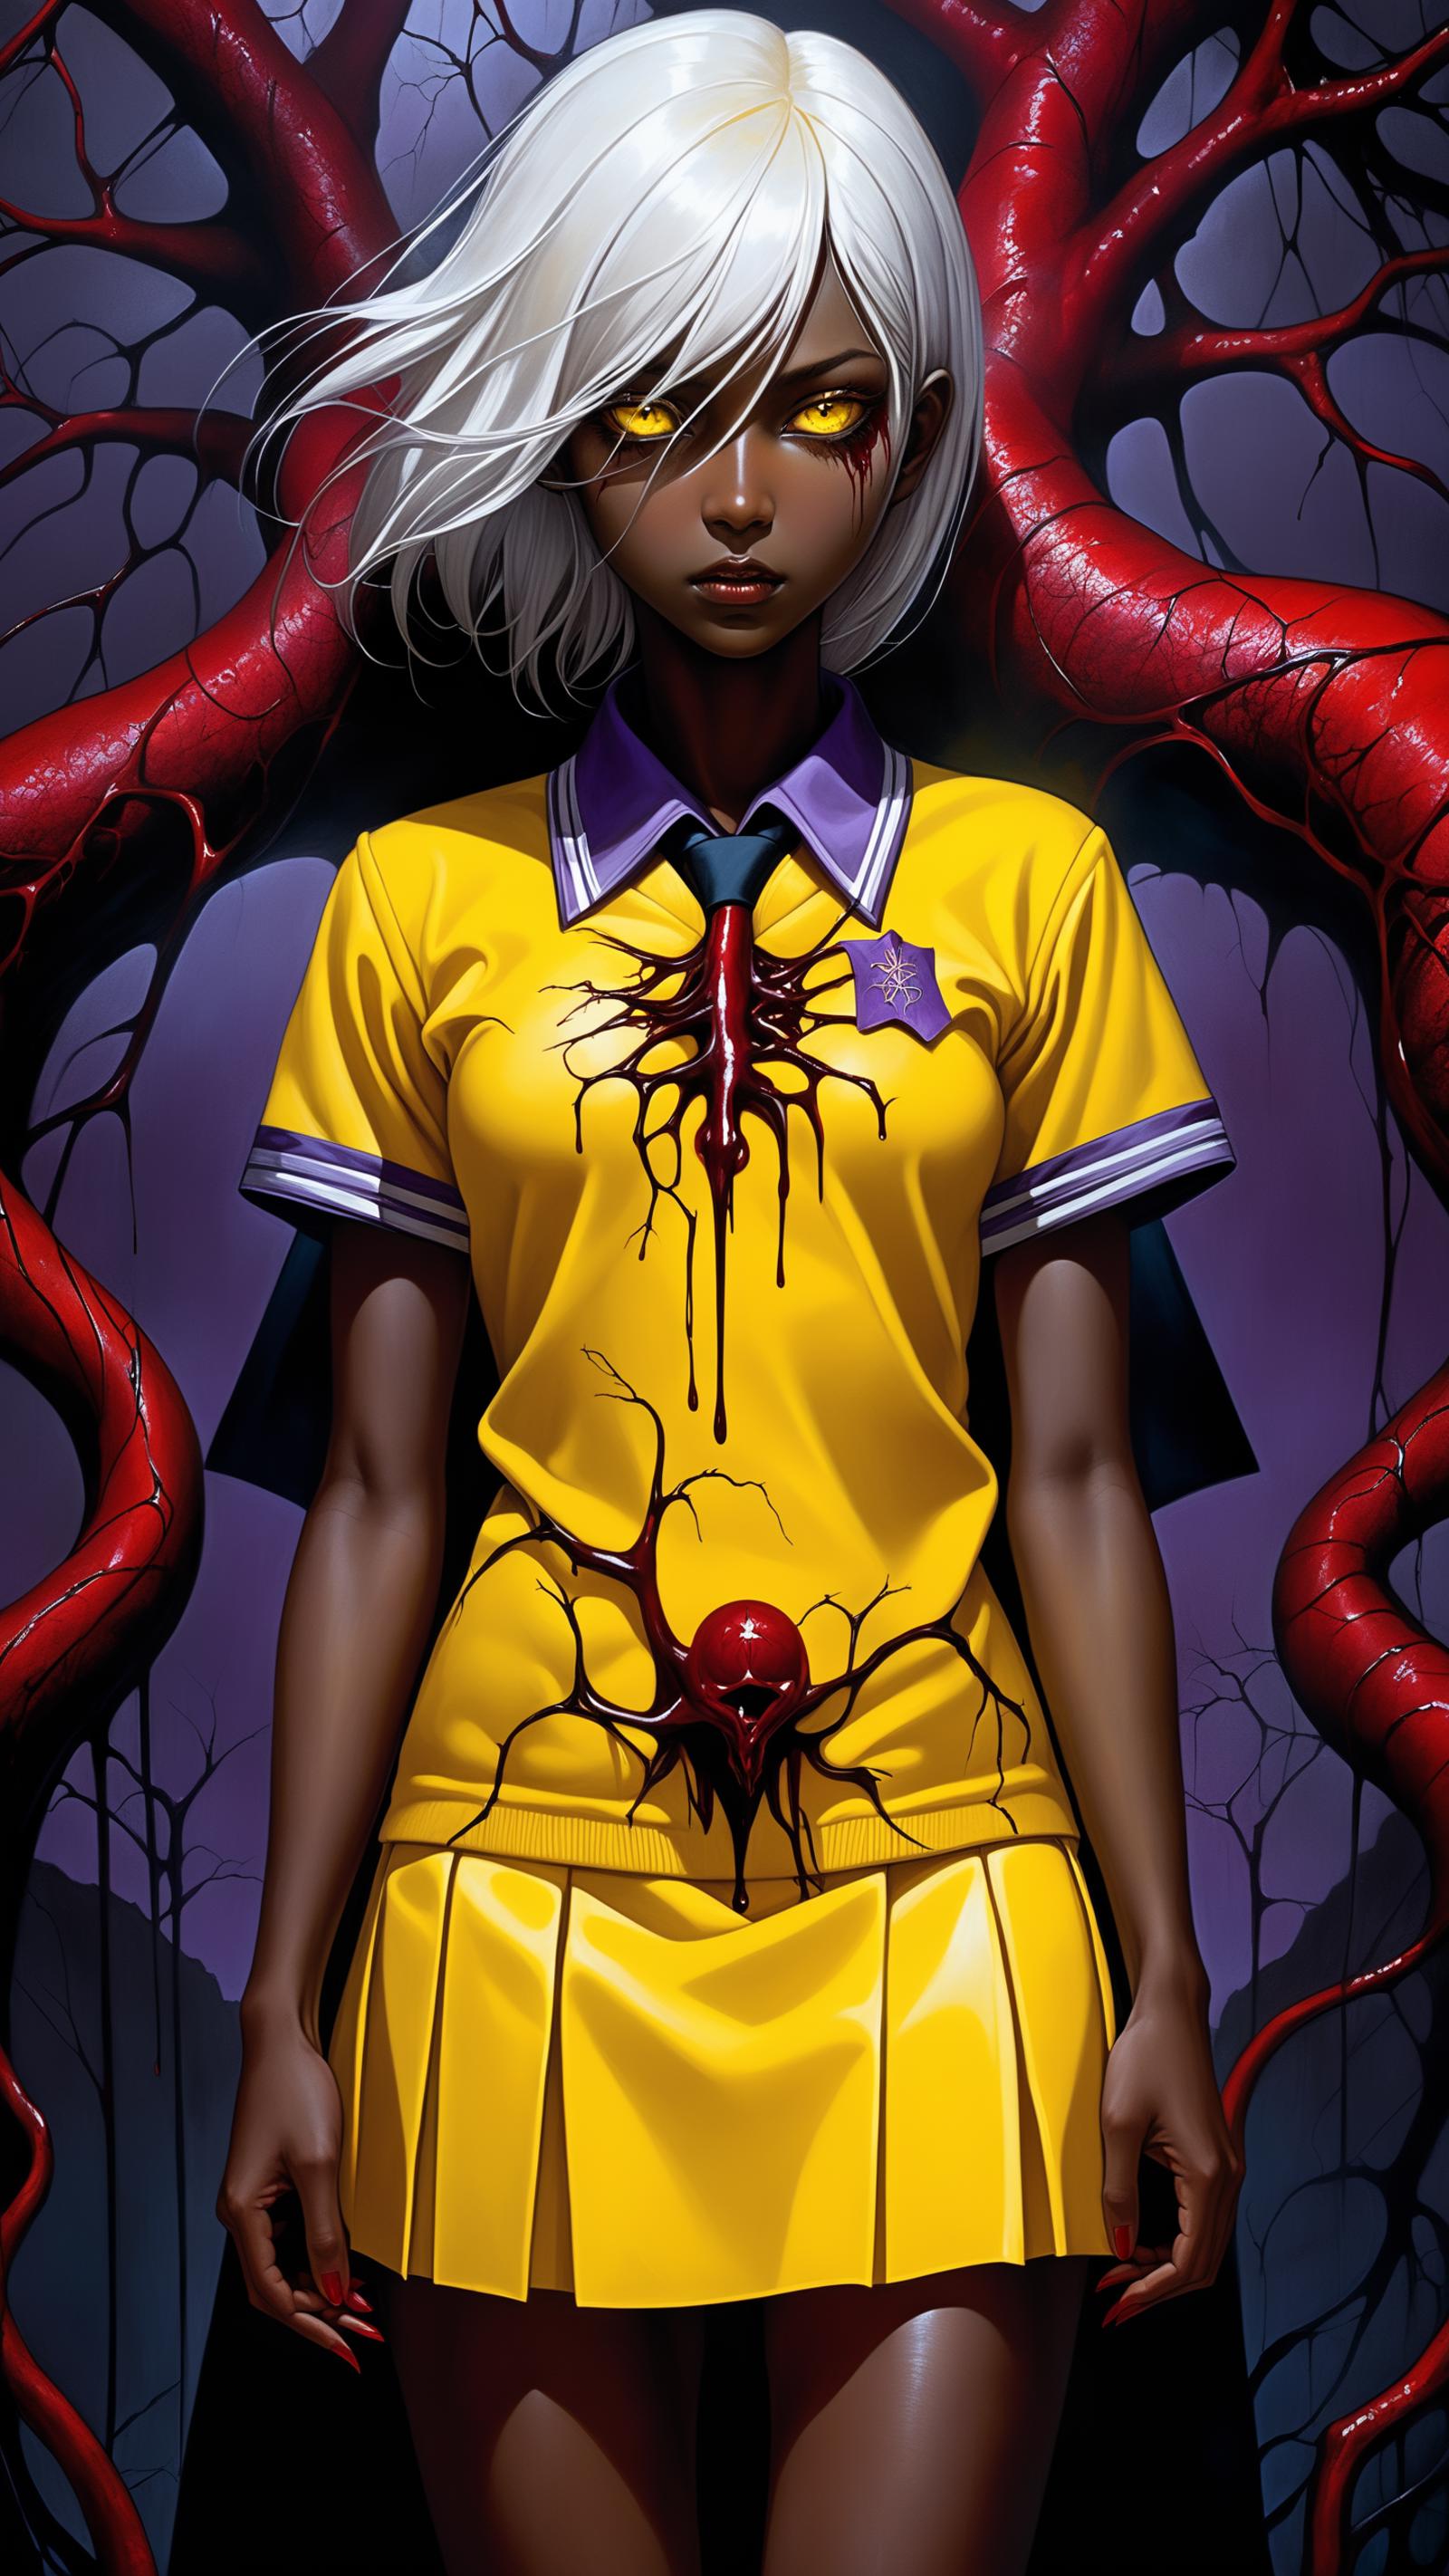 A female character with an open chest and a red heart in a yellow shirt.